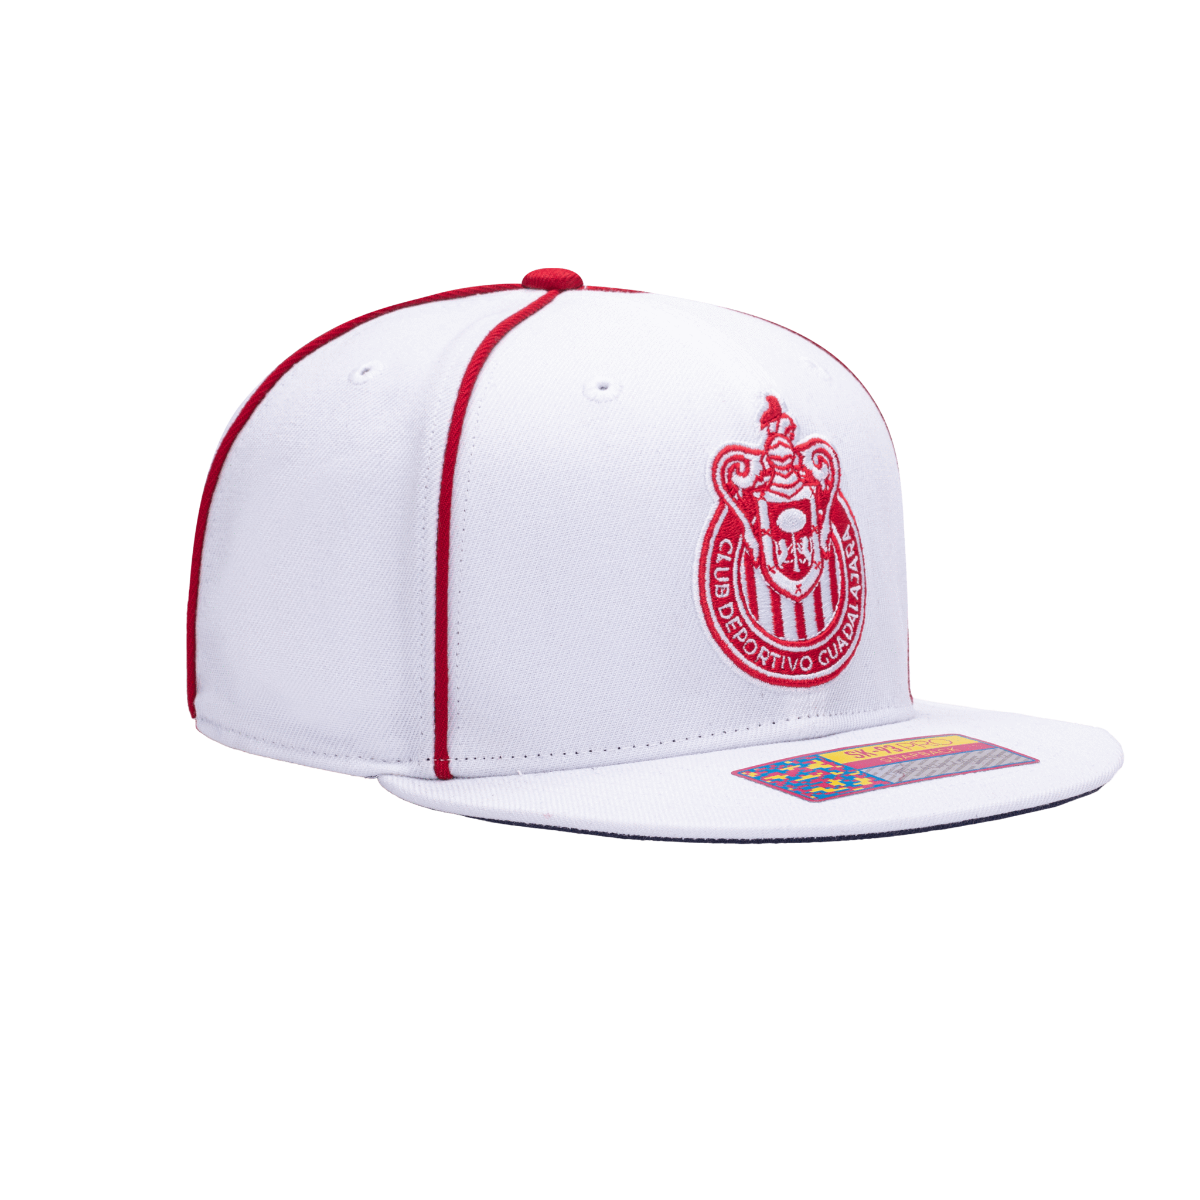 FI Collection Chivas Cali Day Snapback Hat - White-Red (Diagonal 2)